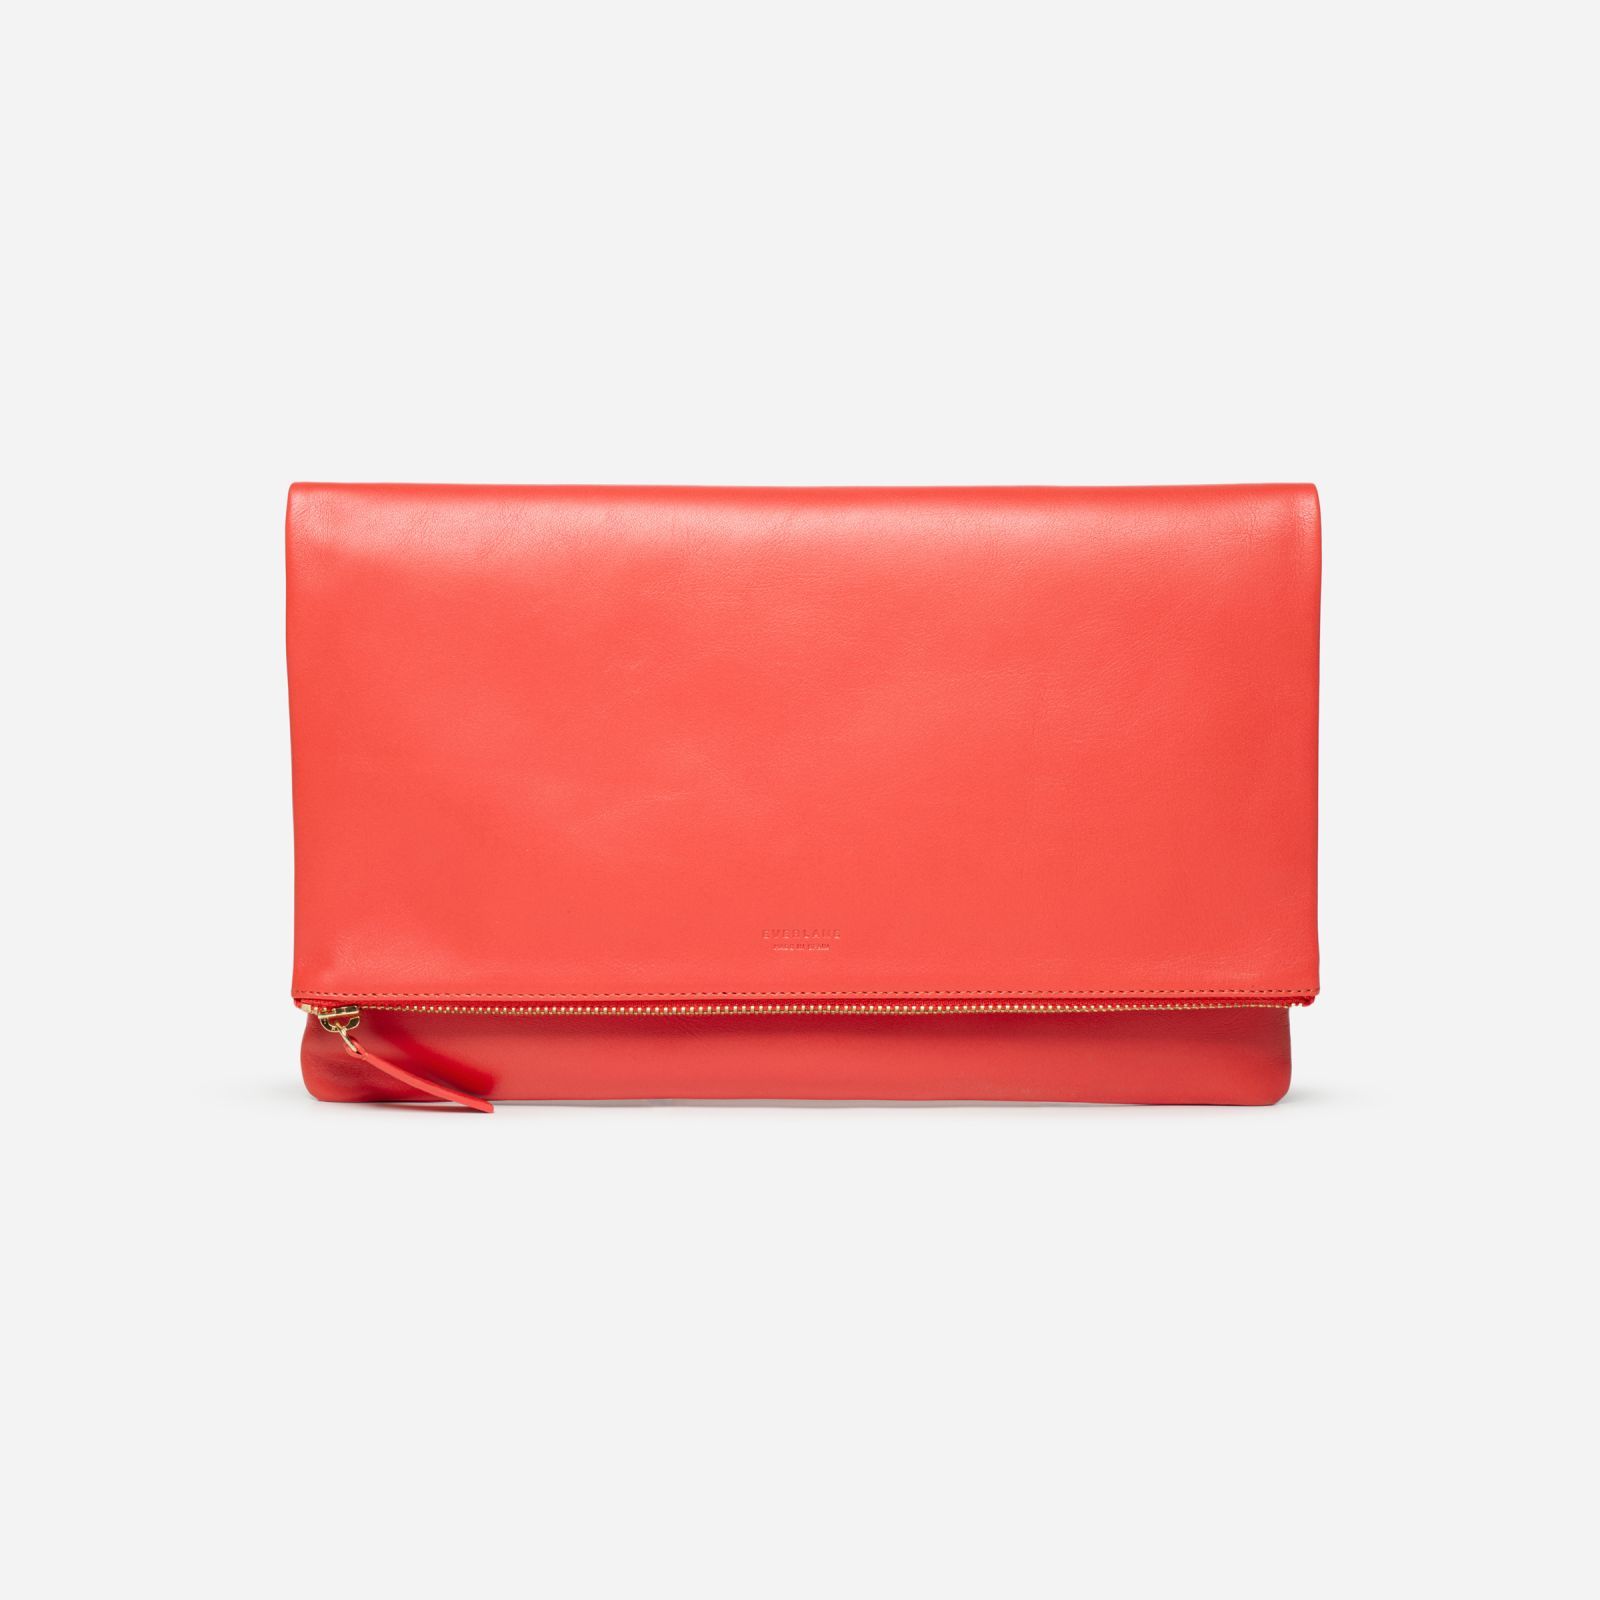 Women's Foldover Pouch by Everlane in Bright Red | Everlane